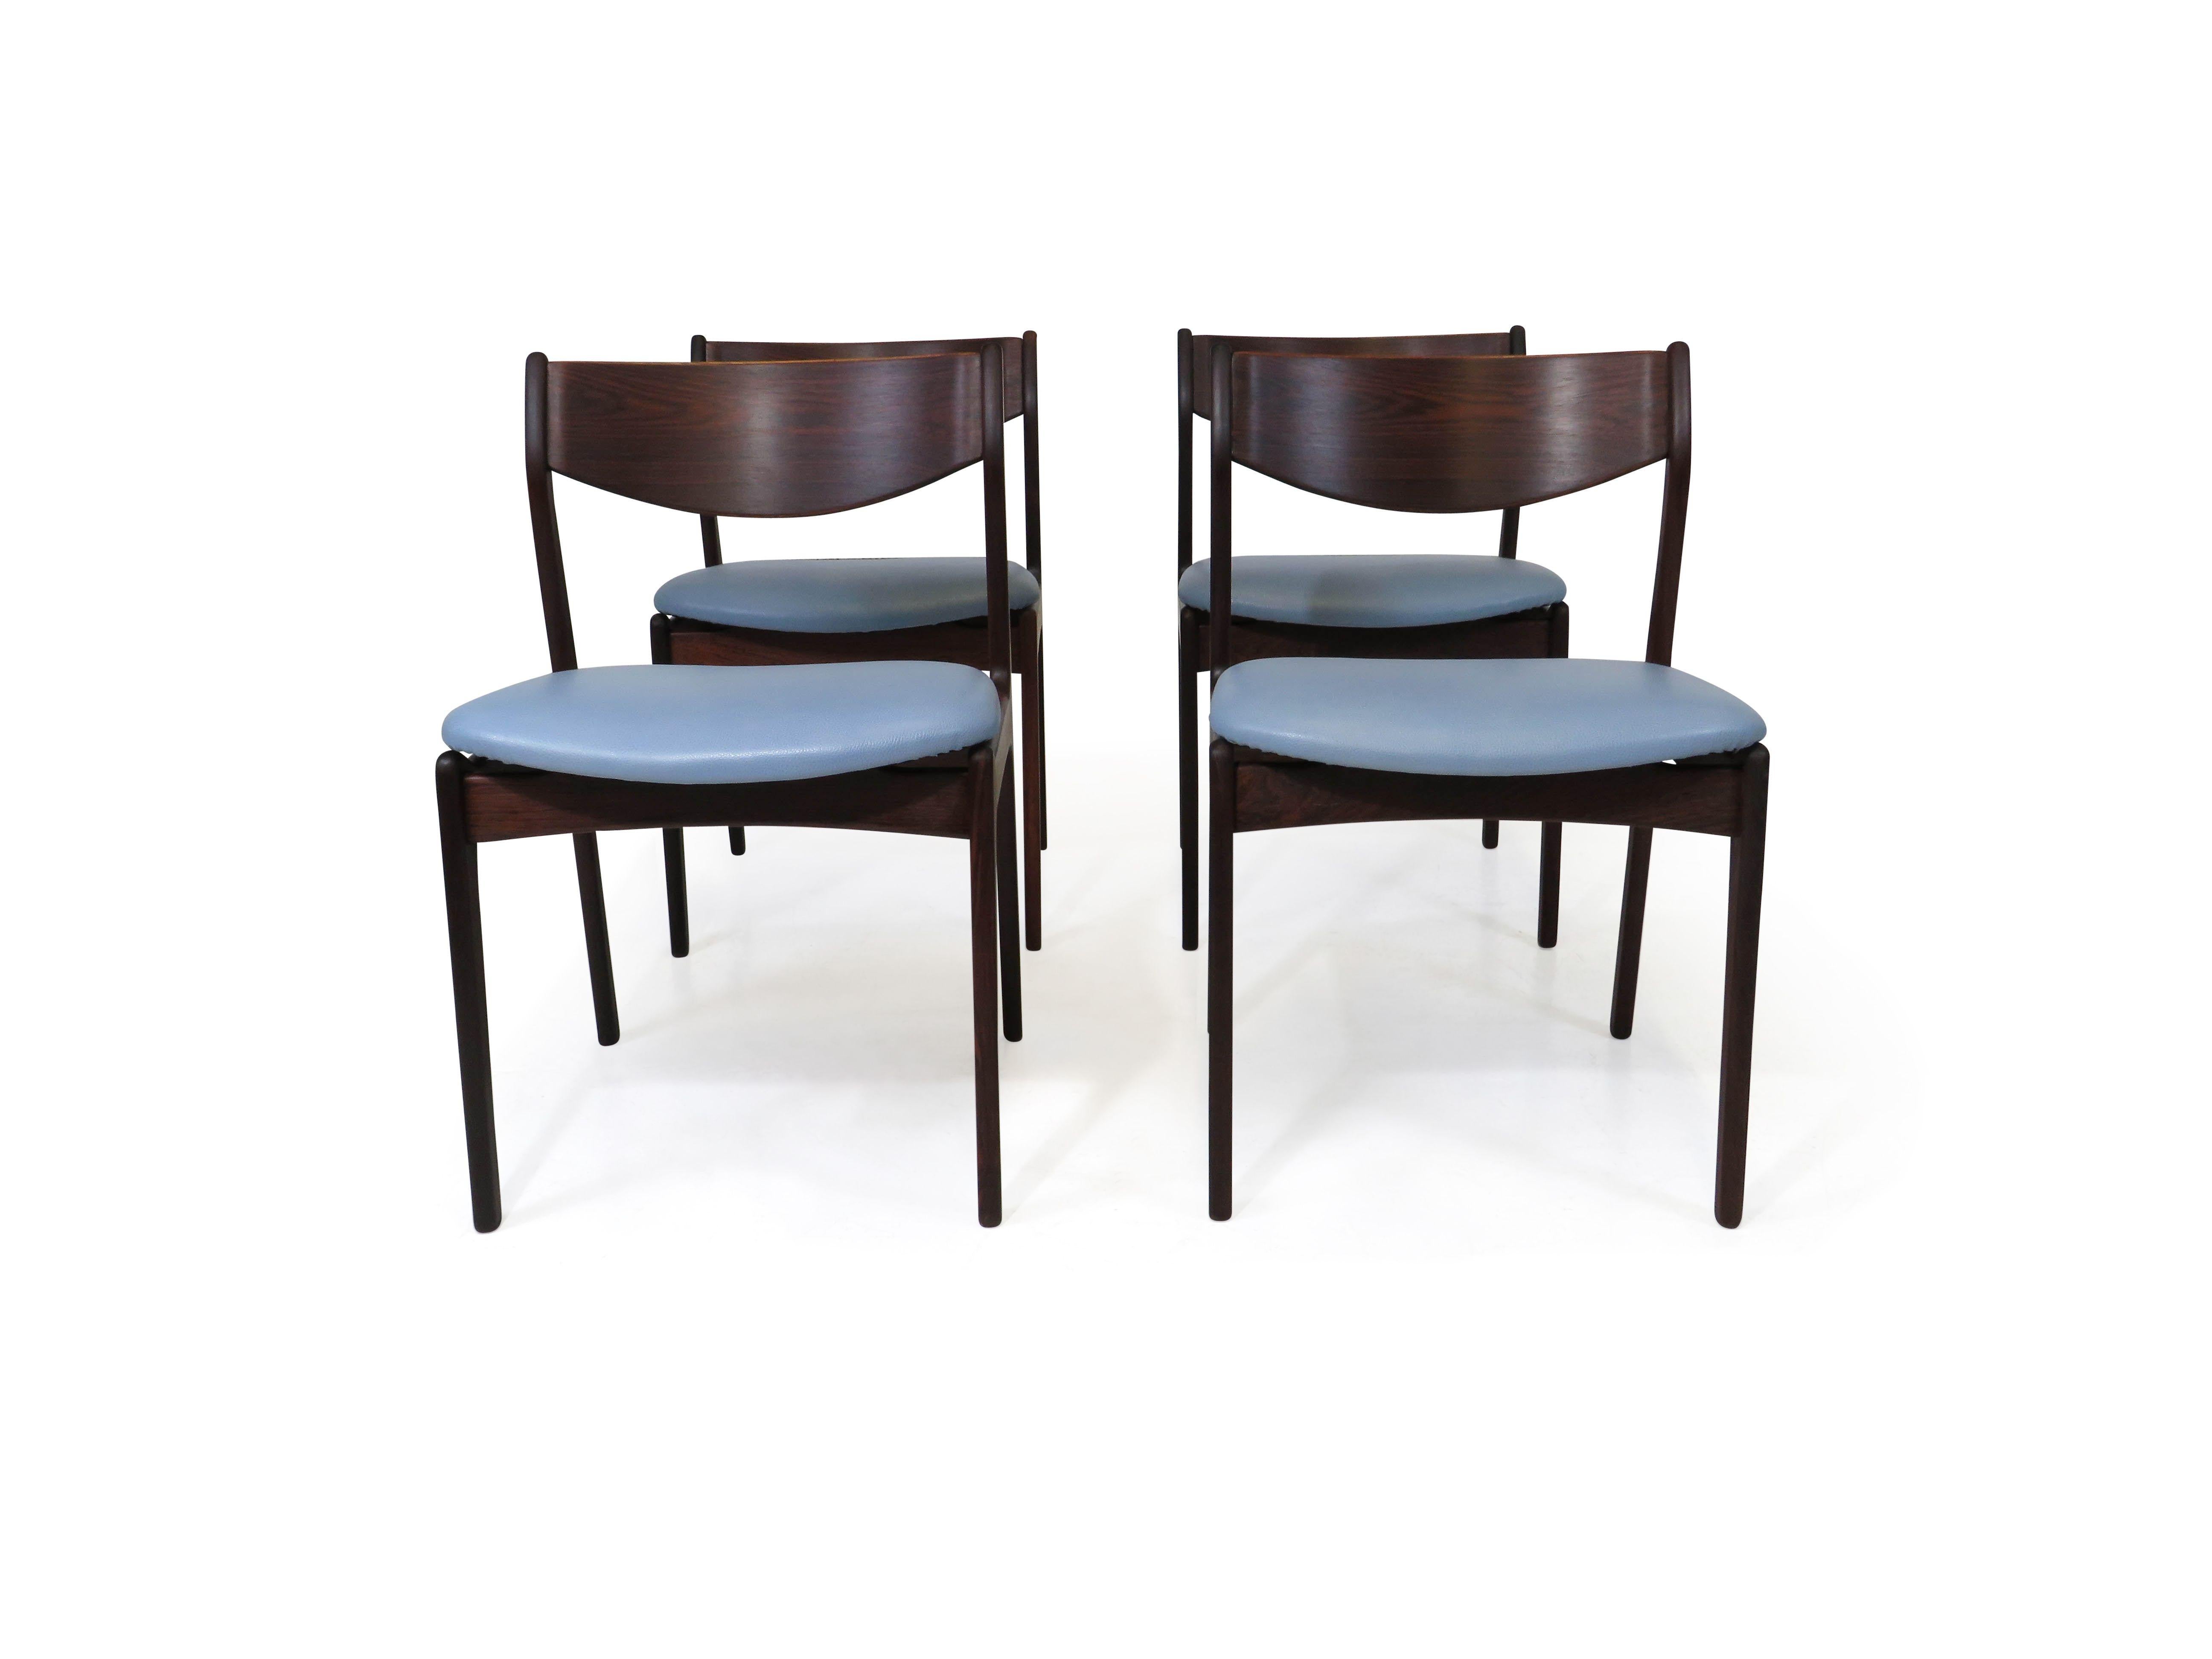 Set of four dining chairs designed by P.E. Jorgensen for Farso Stolefarik crafted of Brazilian rosewood with dark figured grain, and a comfortable backrest, newly upholstered in a durable sky blue leather.  Seat Height 18.50''
 
Note: 18 More chairs